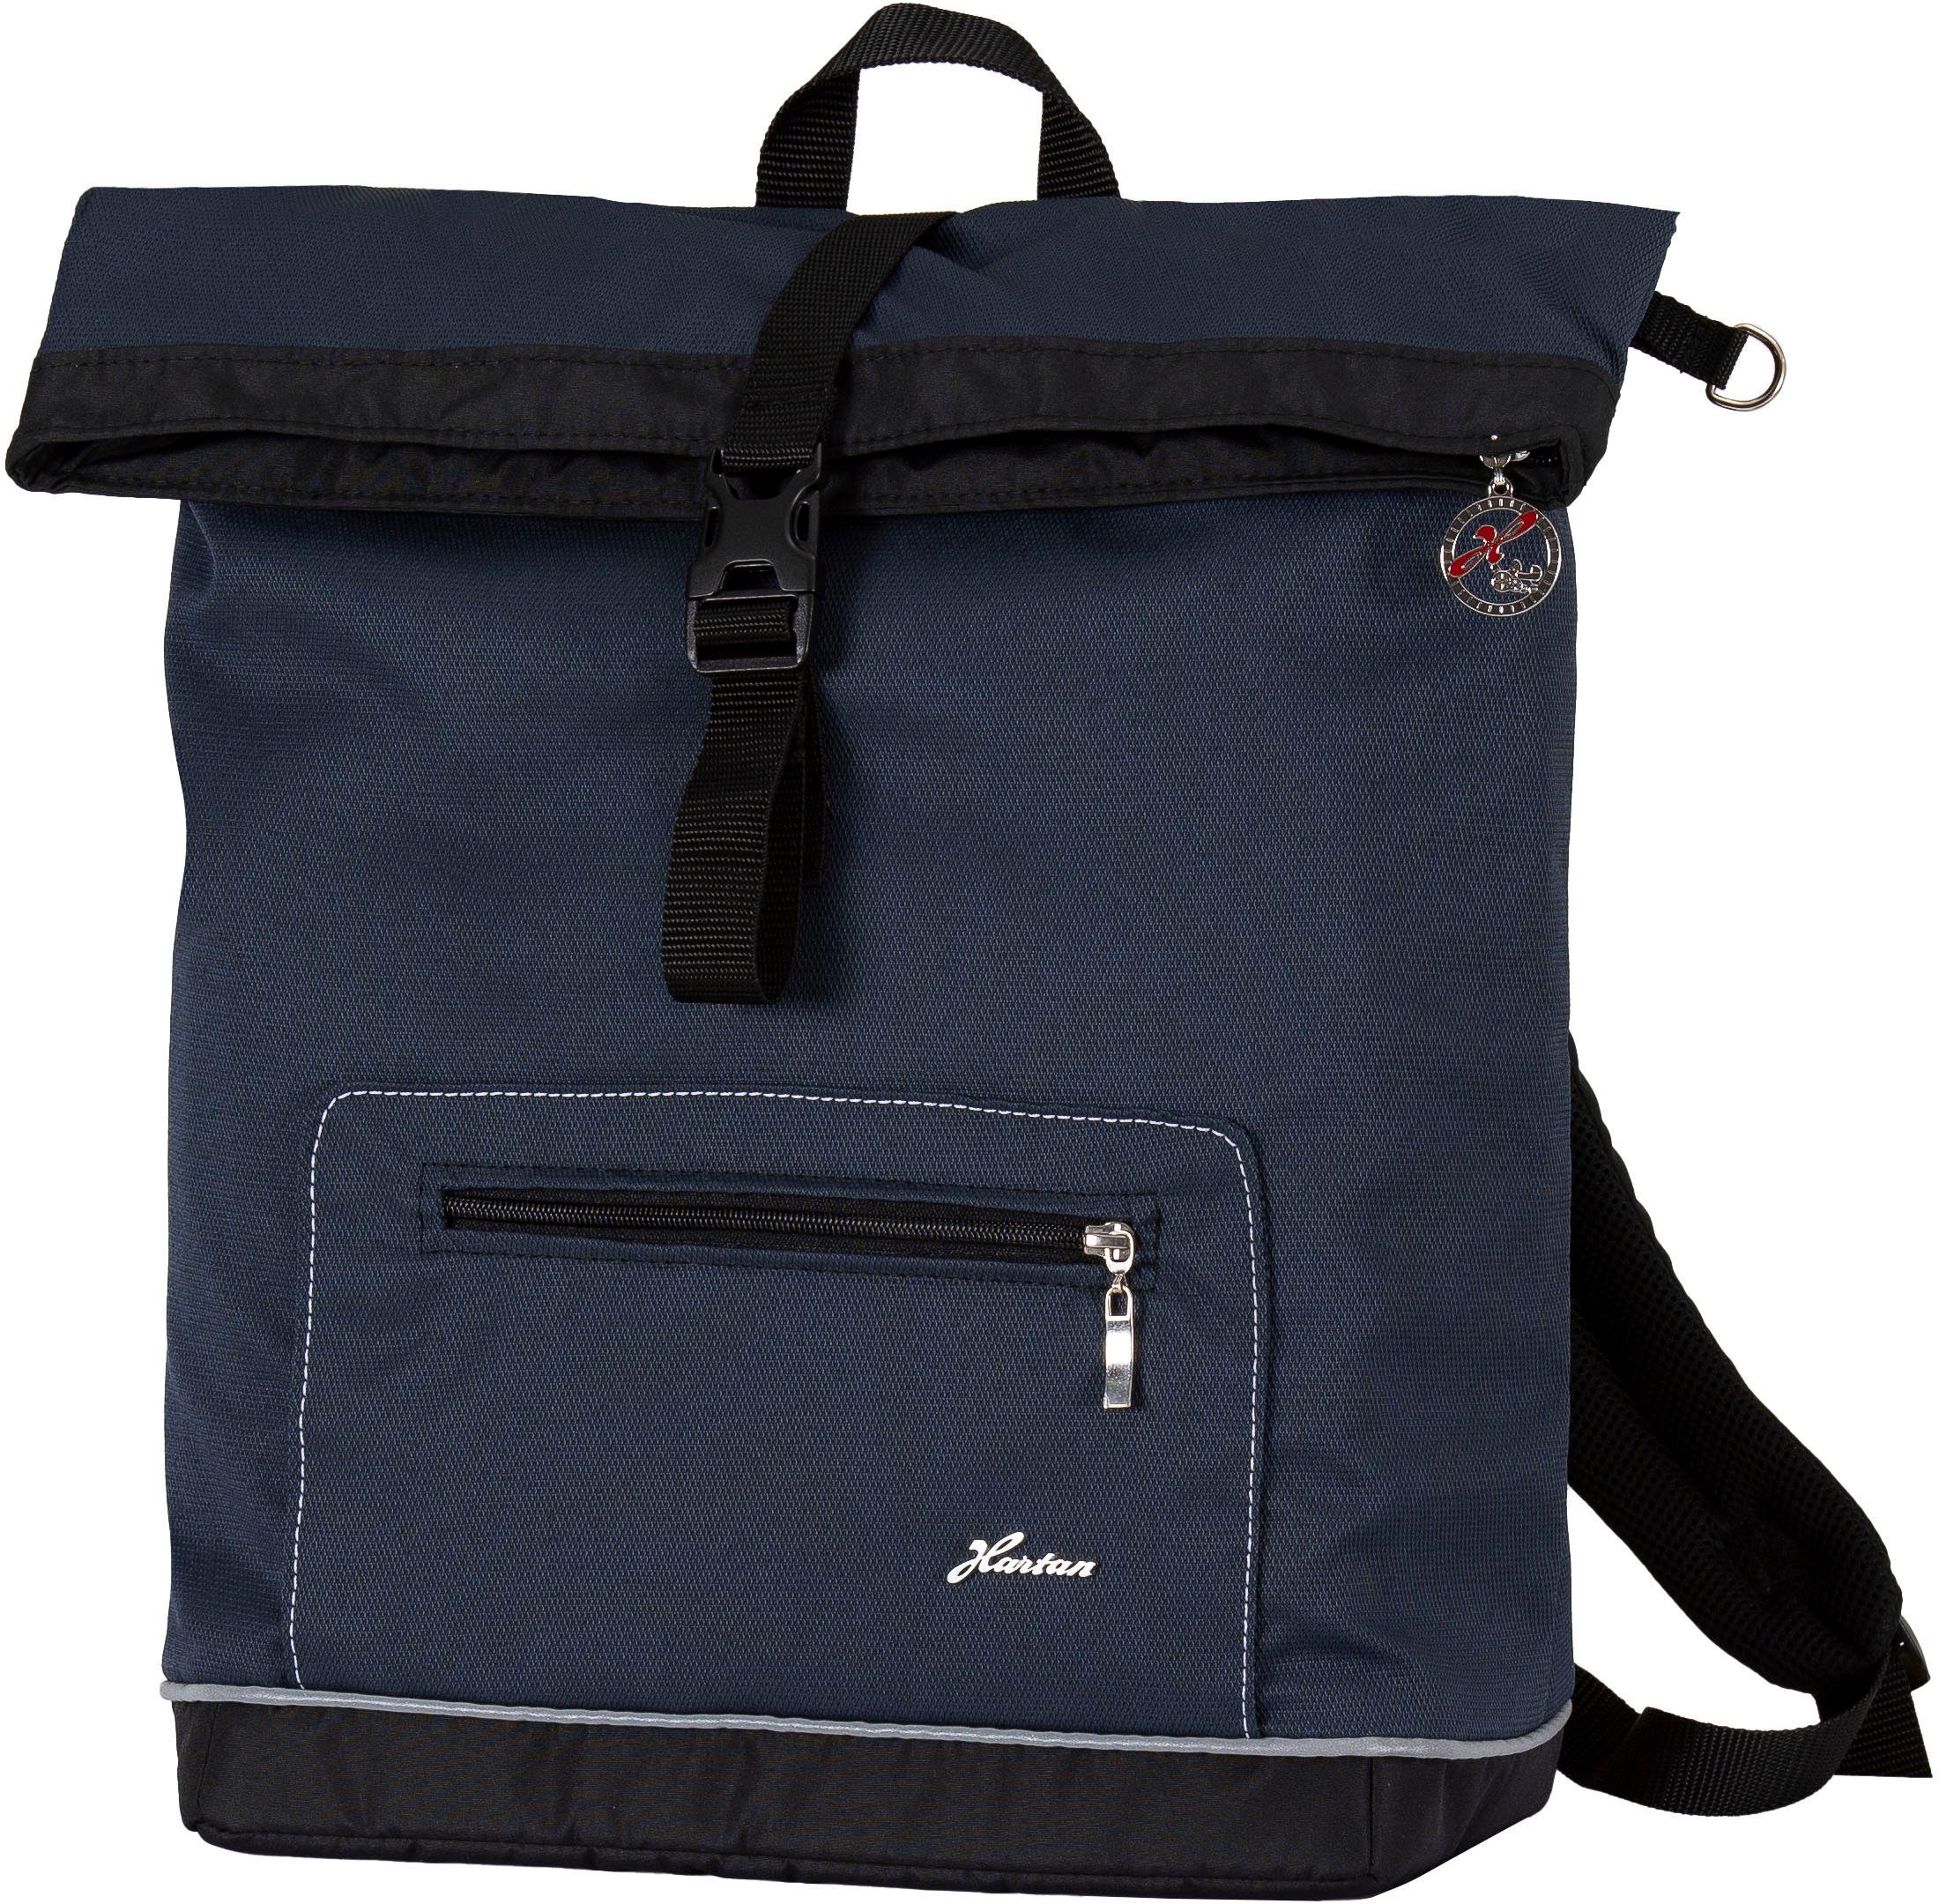 Hartan Wickelrucksack Space bag - Casual Collection, mit Thermofach; Made in Germany navy stripes